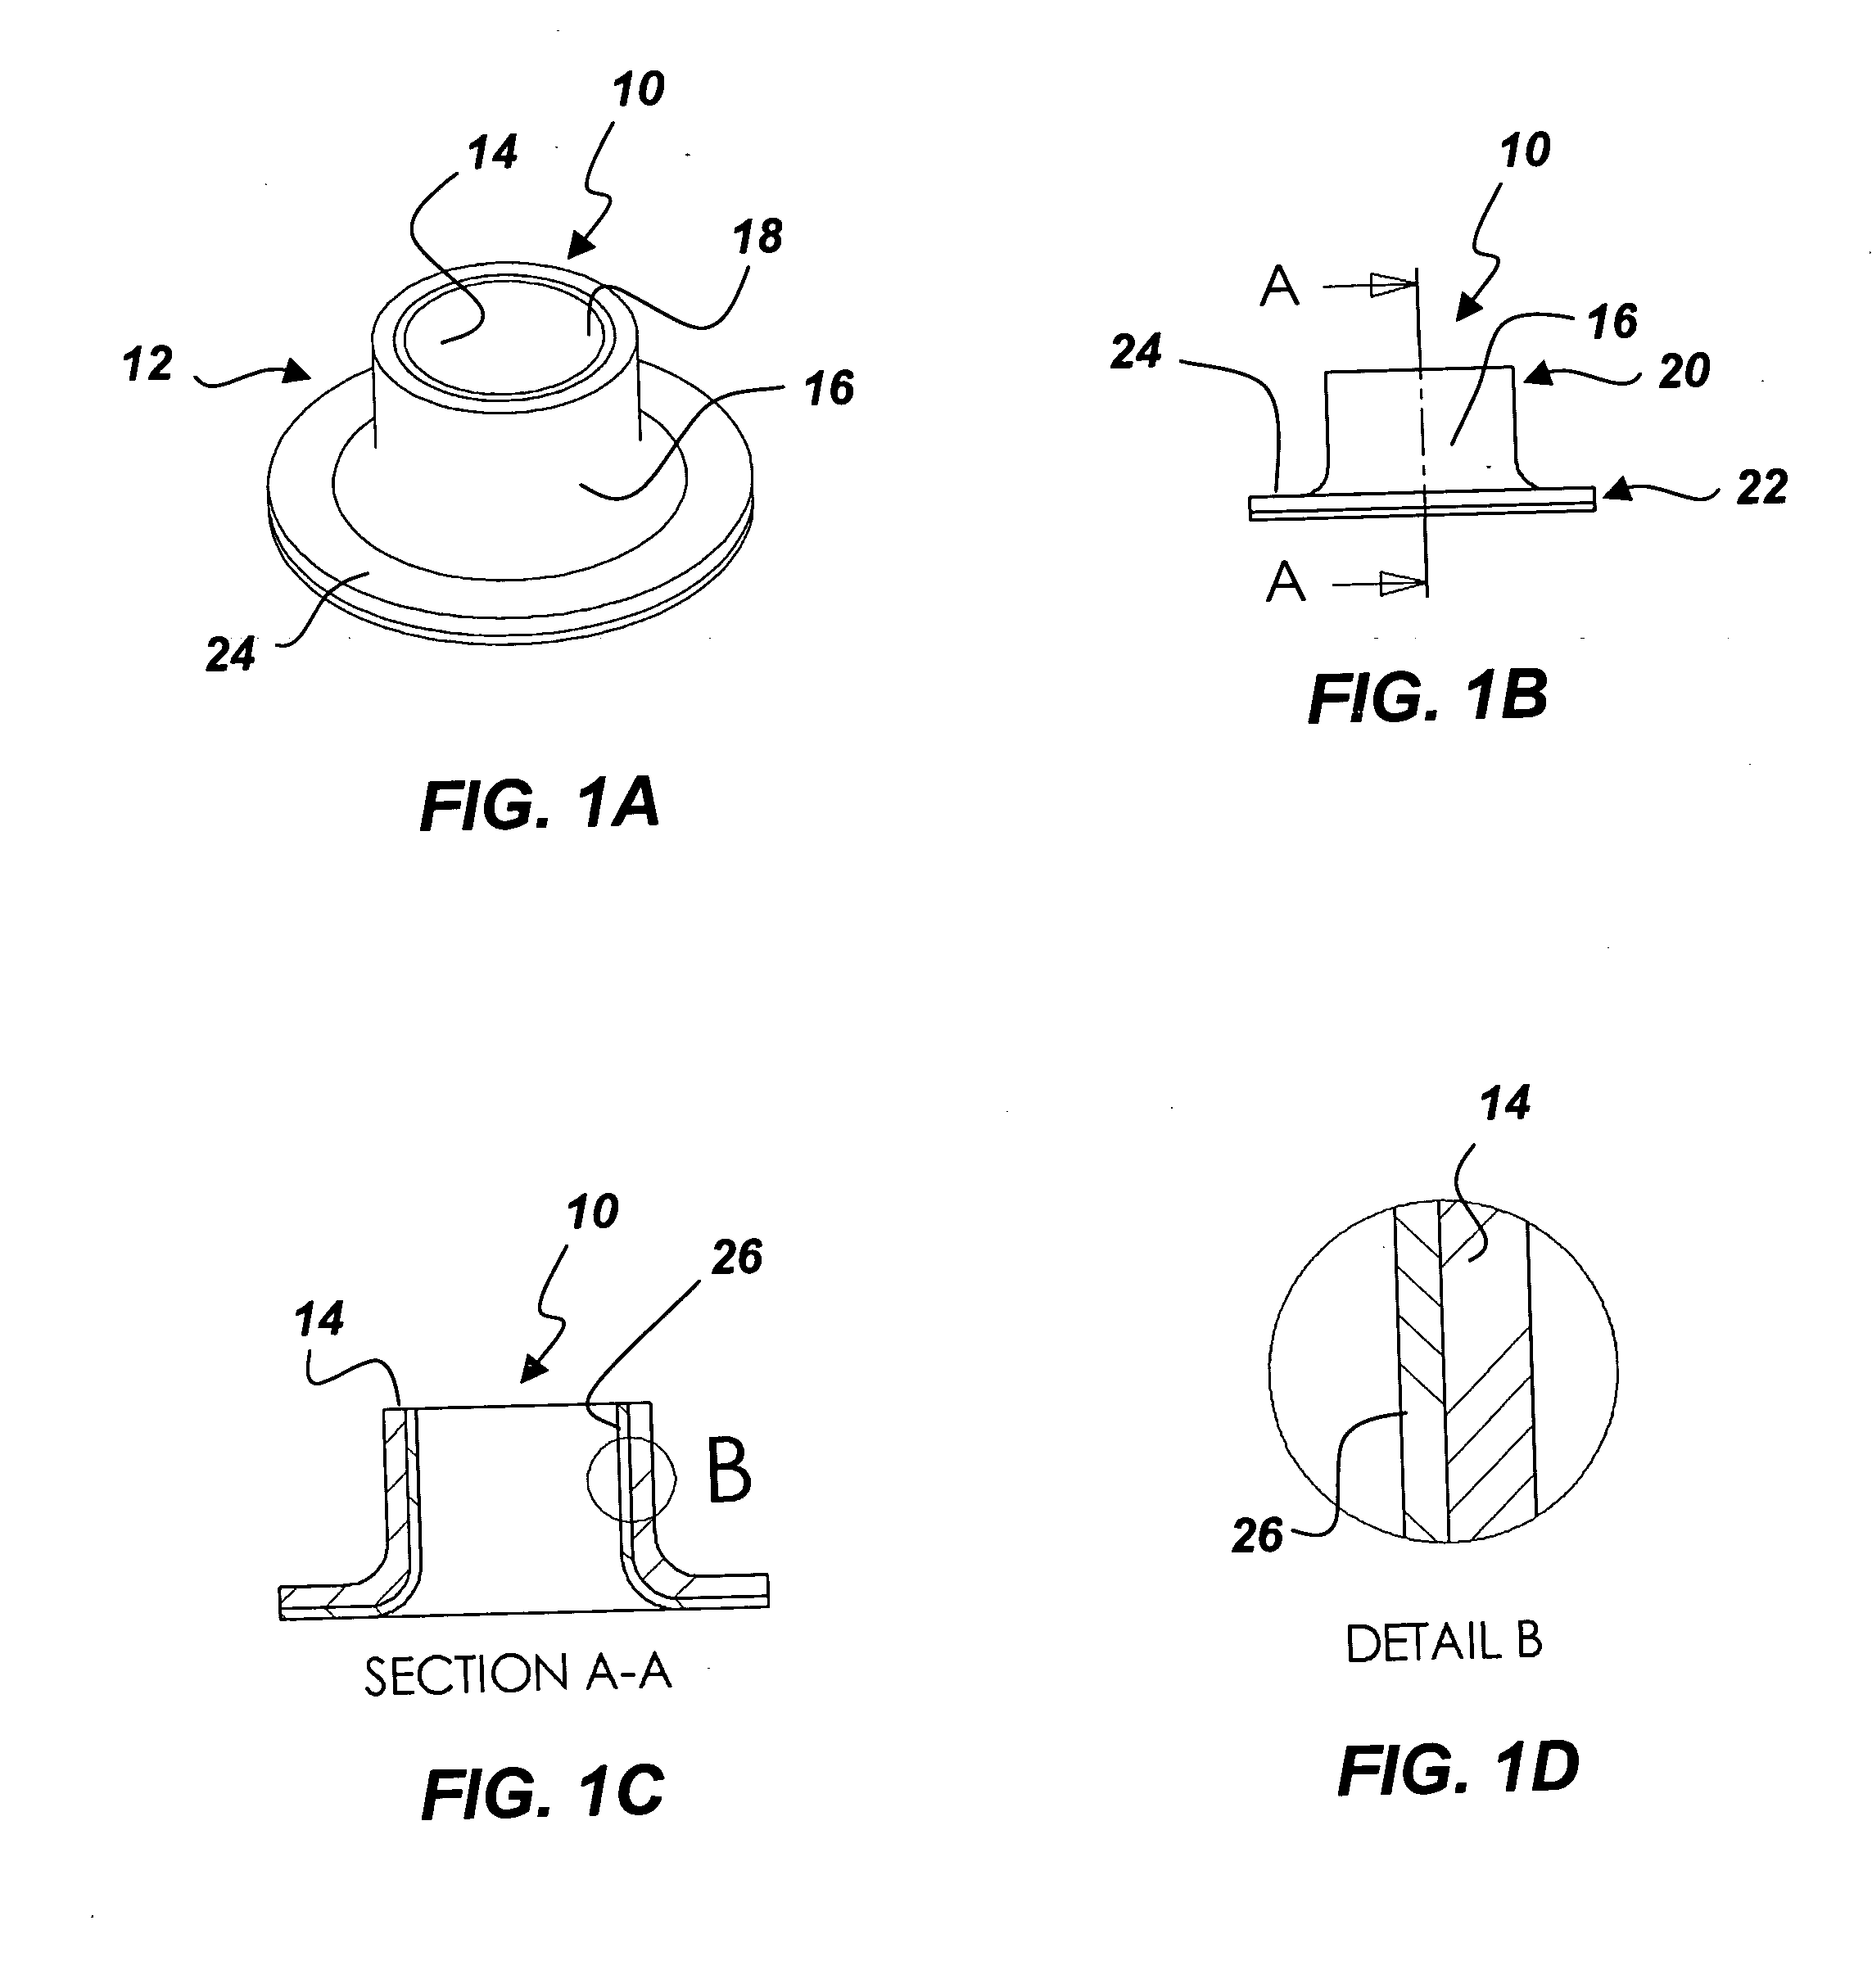 Mechanisms and methods used in the anastomosis of biological conduits